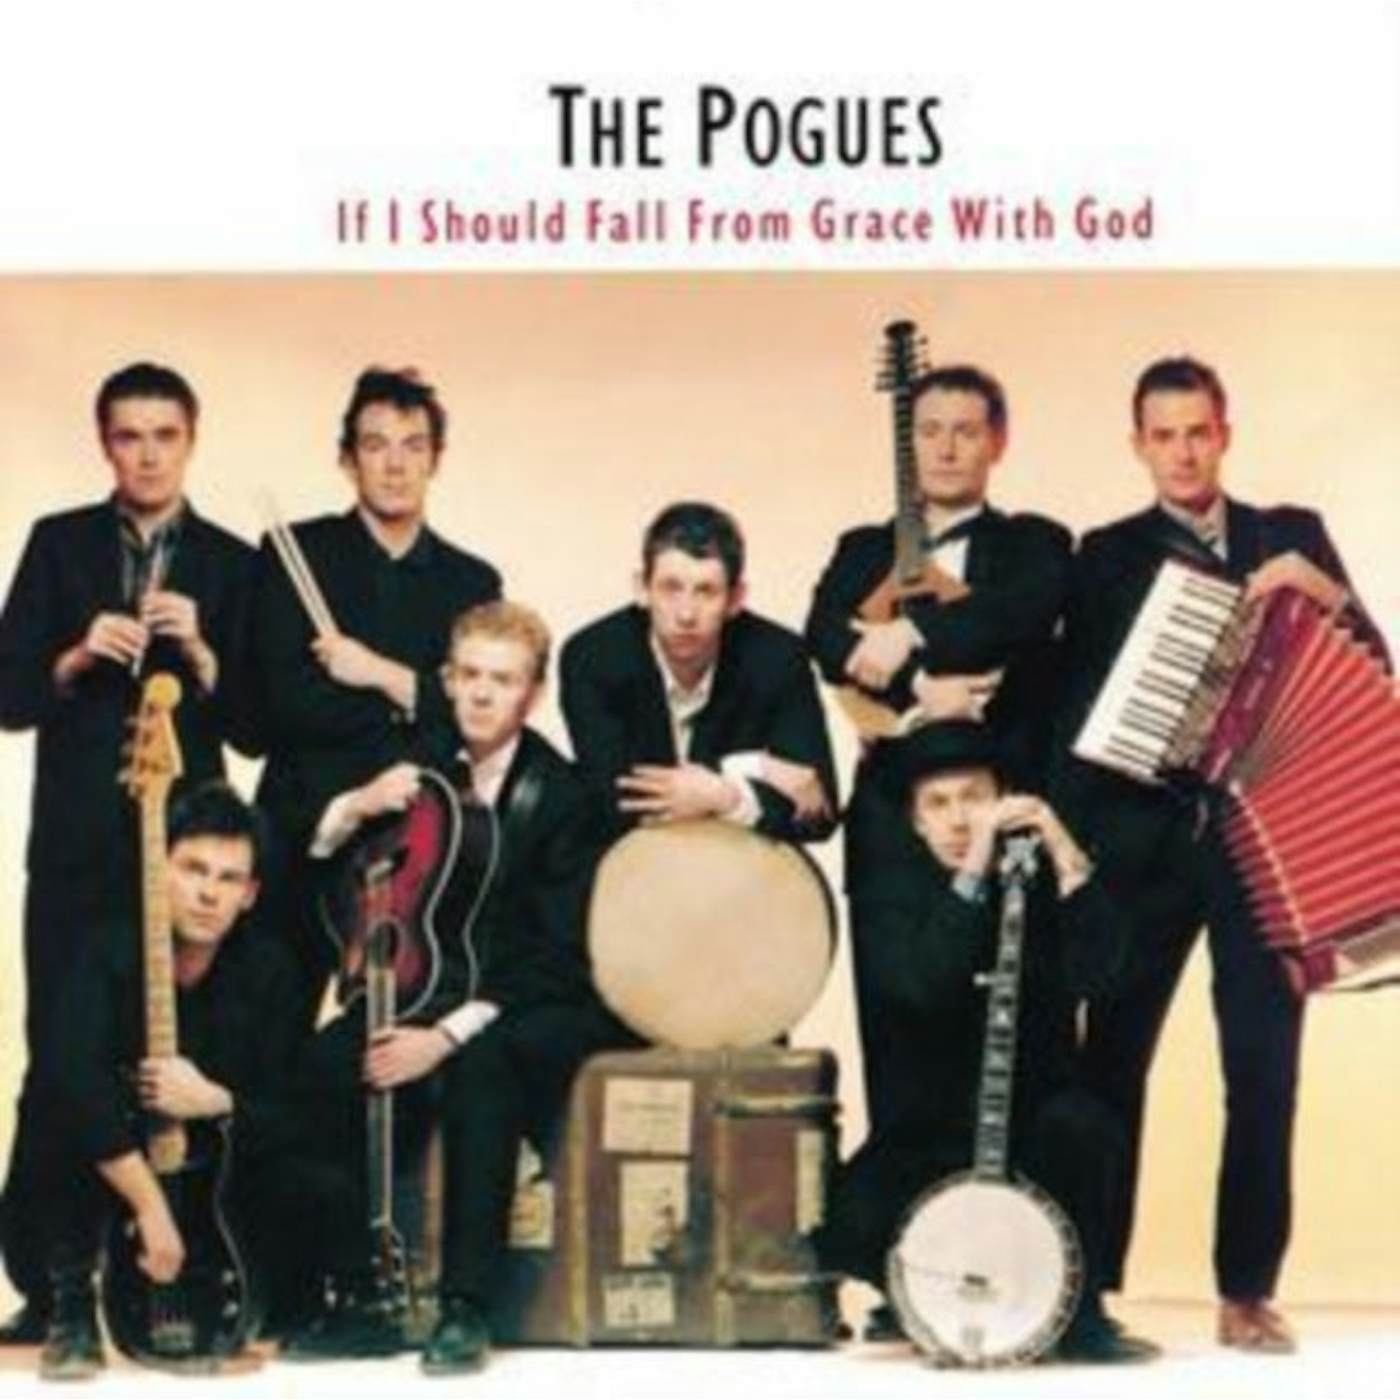 The Pogues CD - If I Should Fall From Grace With God